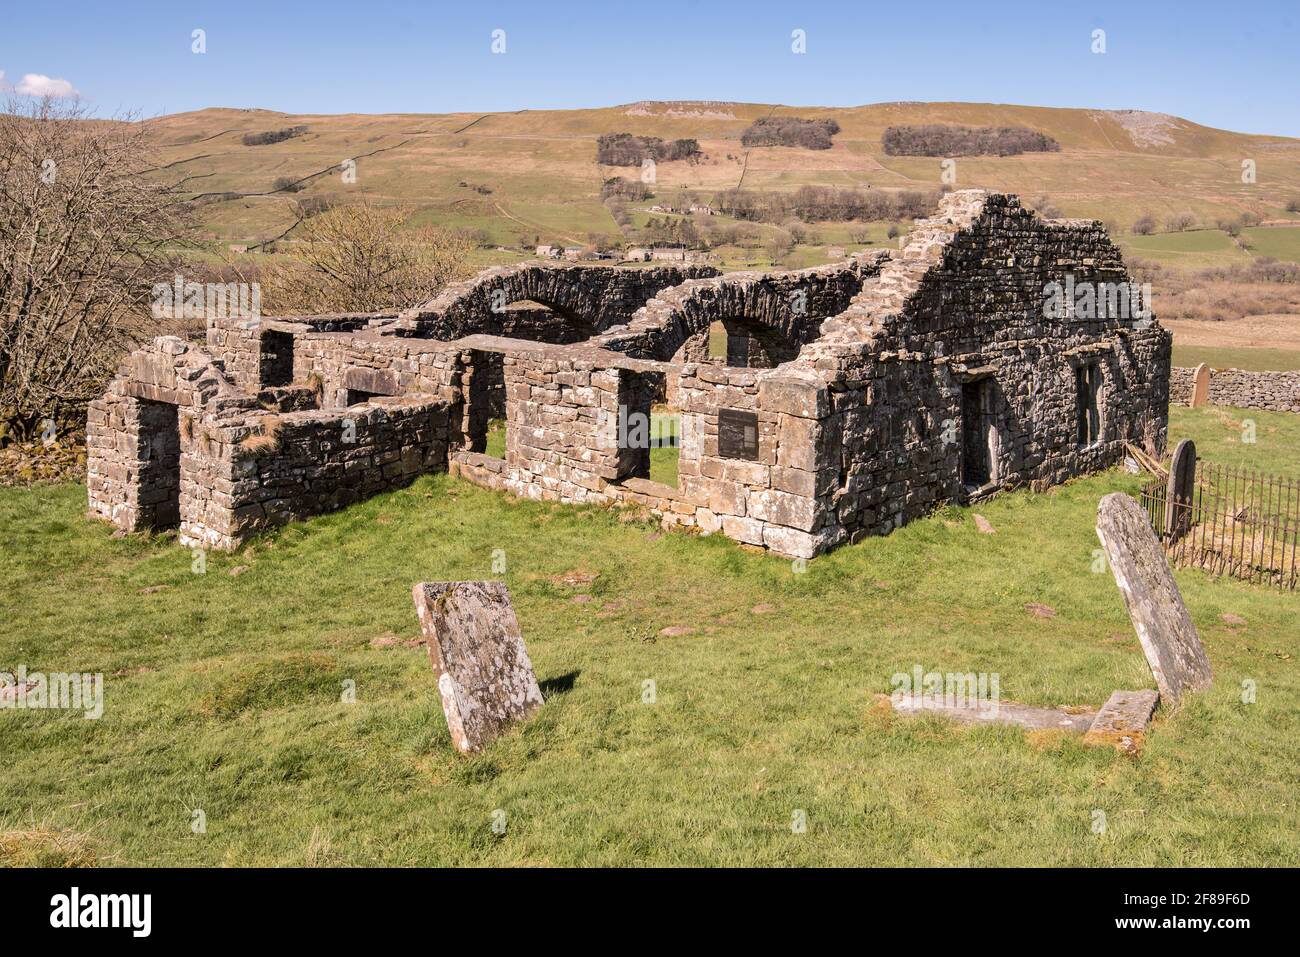 The rugged ruin of Stalling Busk Old Church  Raydale Yorkshire Dales National Park England Stock Photo